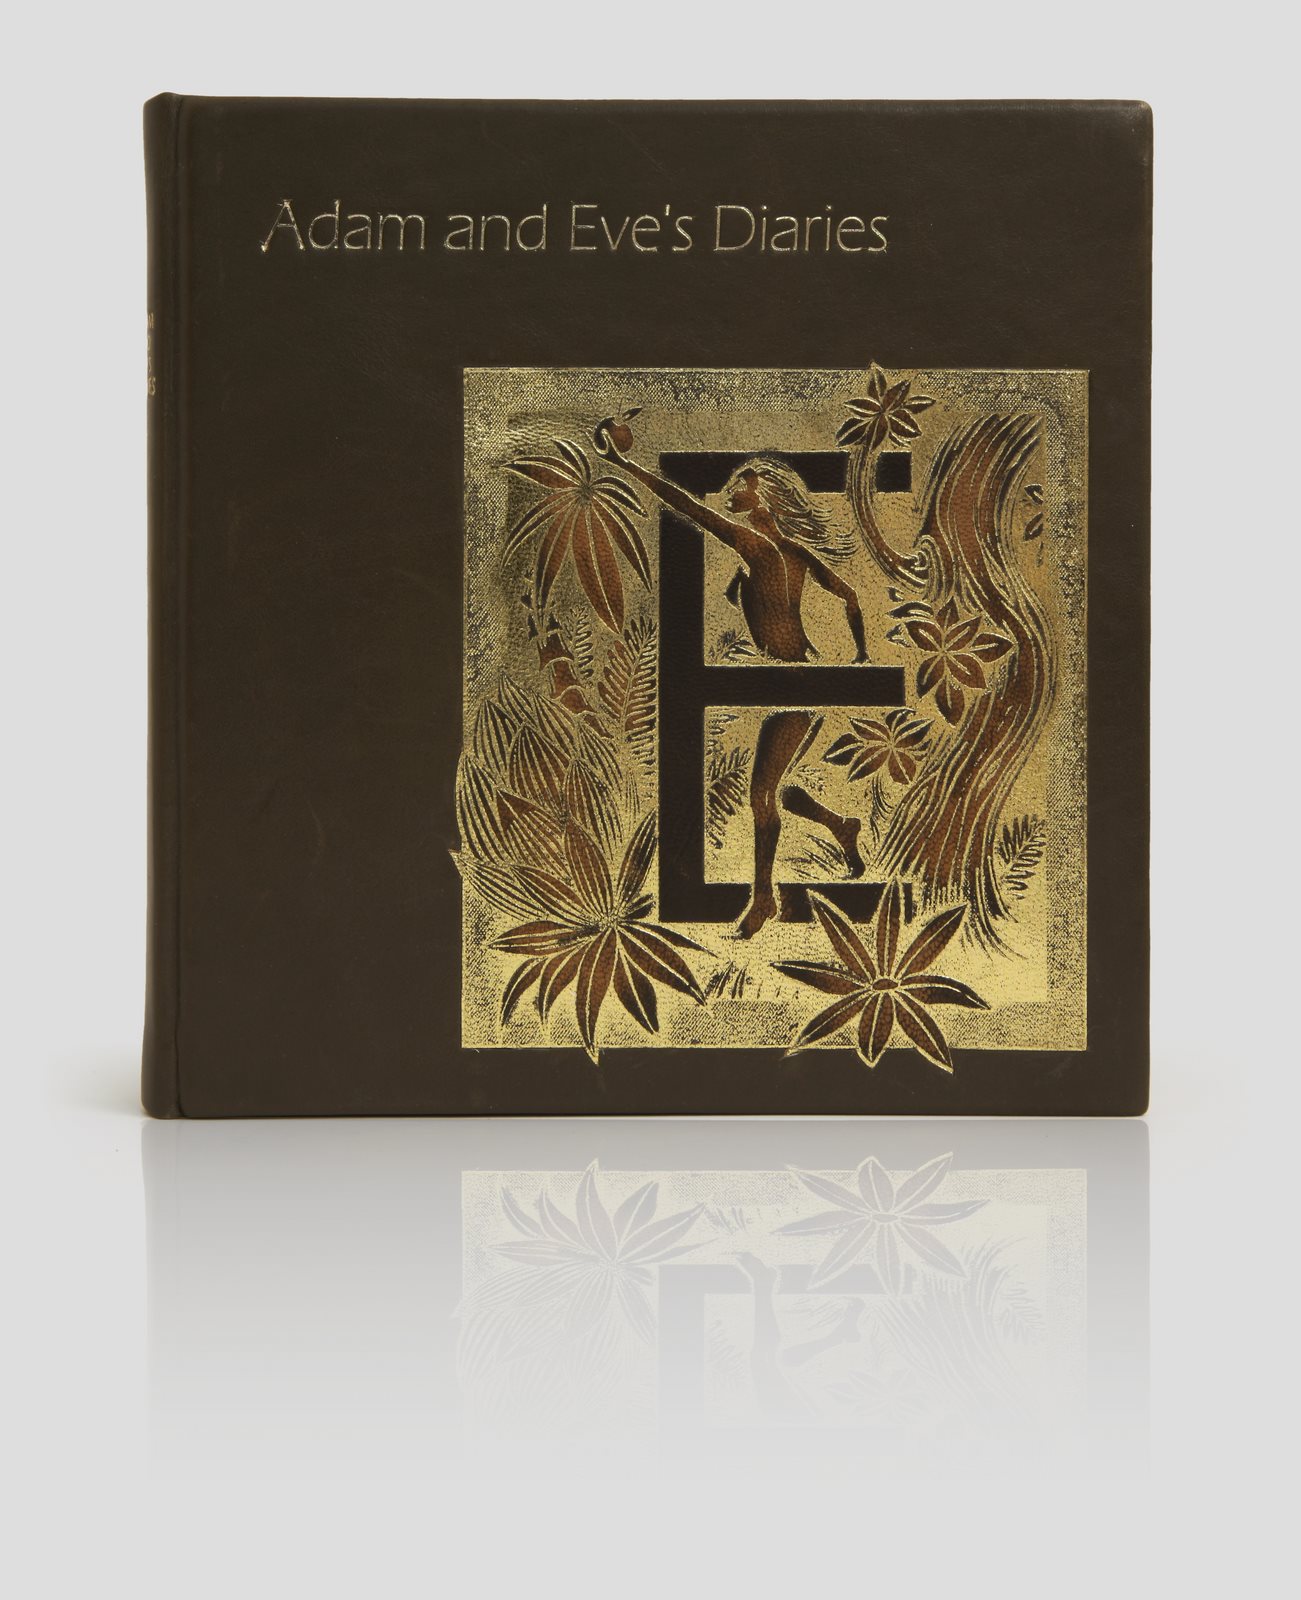 Adam and Eve's Diaries - Mark Twain - collectible books - rare books - unique leather binding